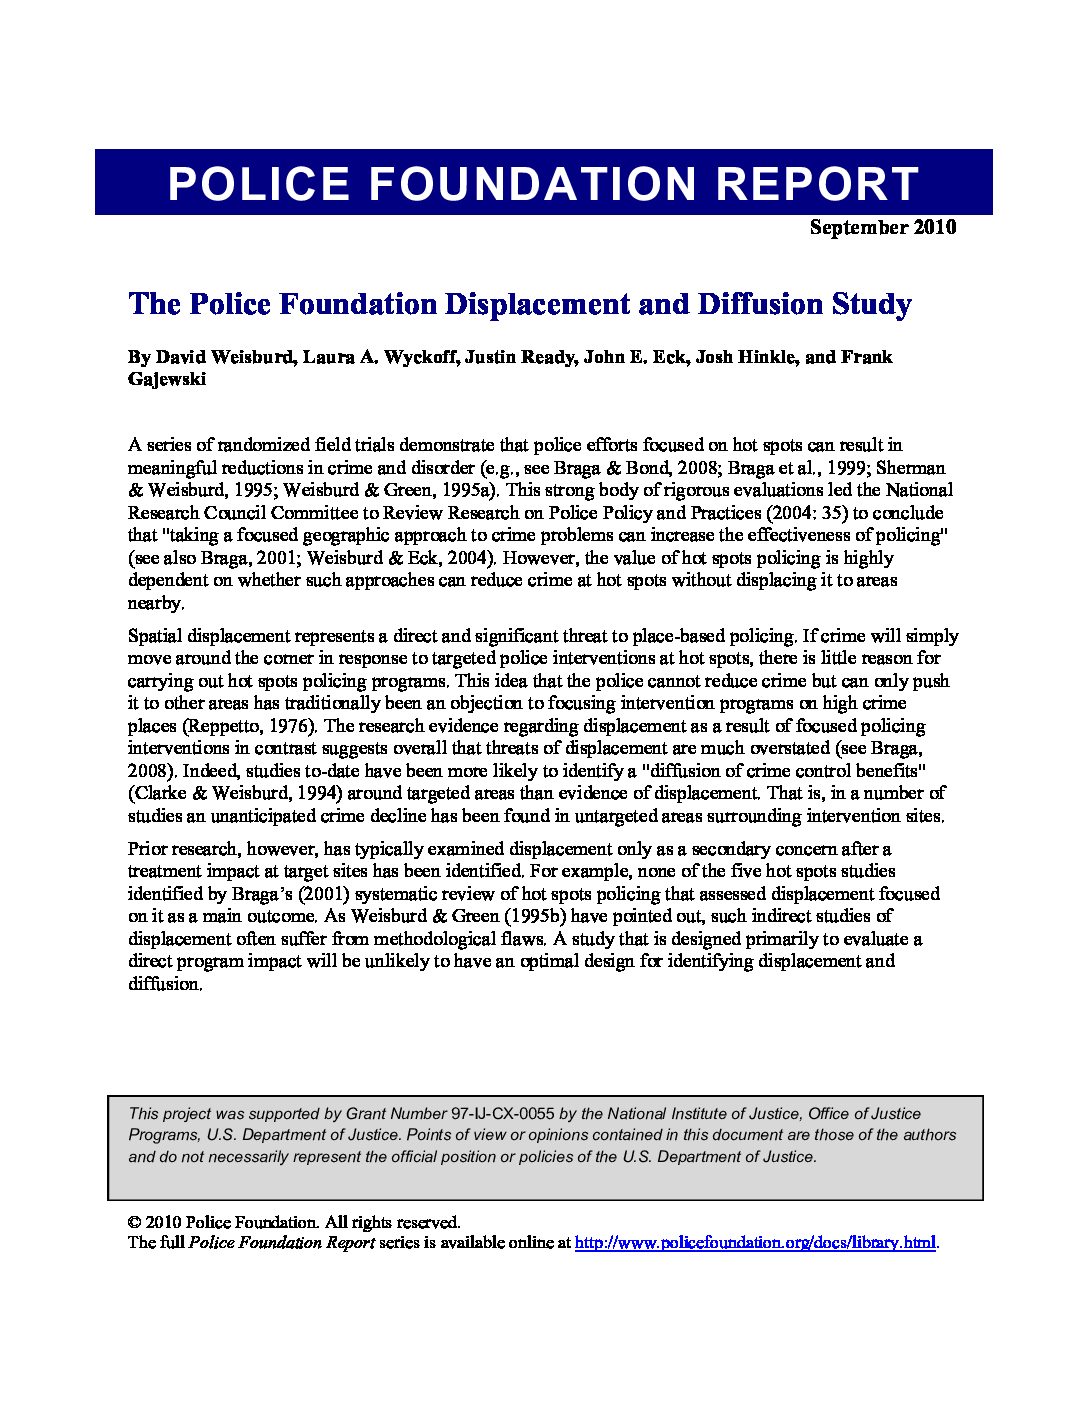 Weisburd-et-al.-2010-The-Police-Foundation-Displacement-and-Diffusion-Study-pdf